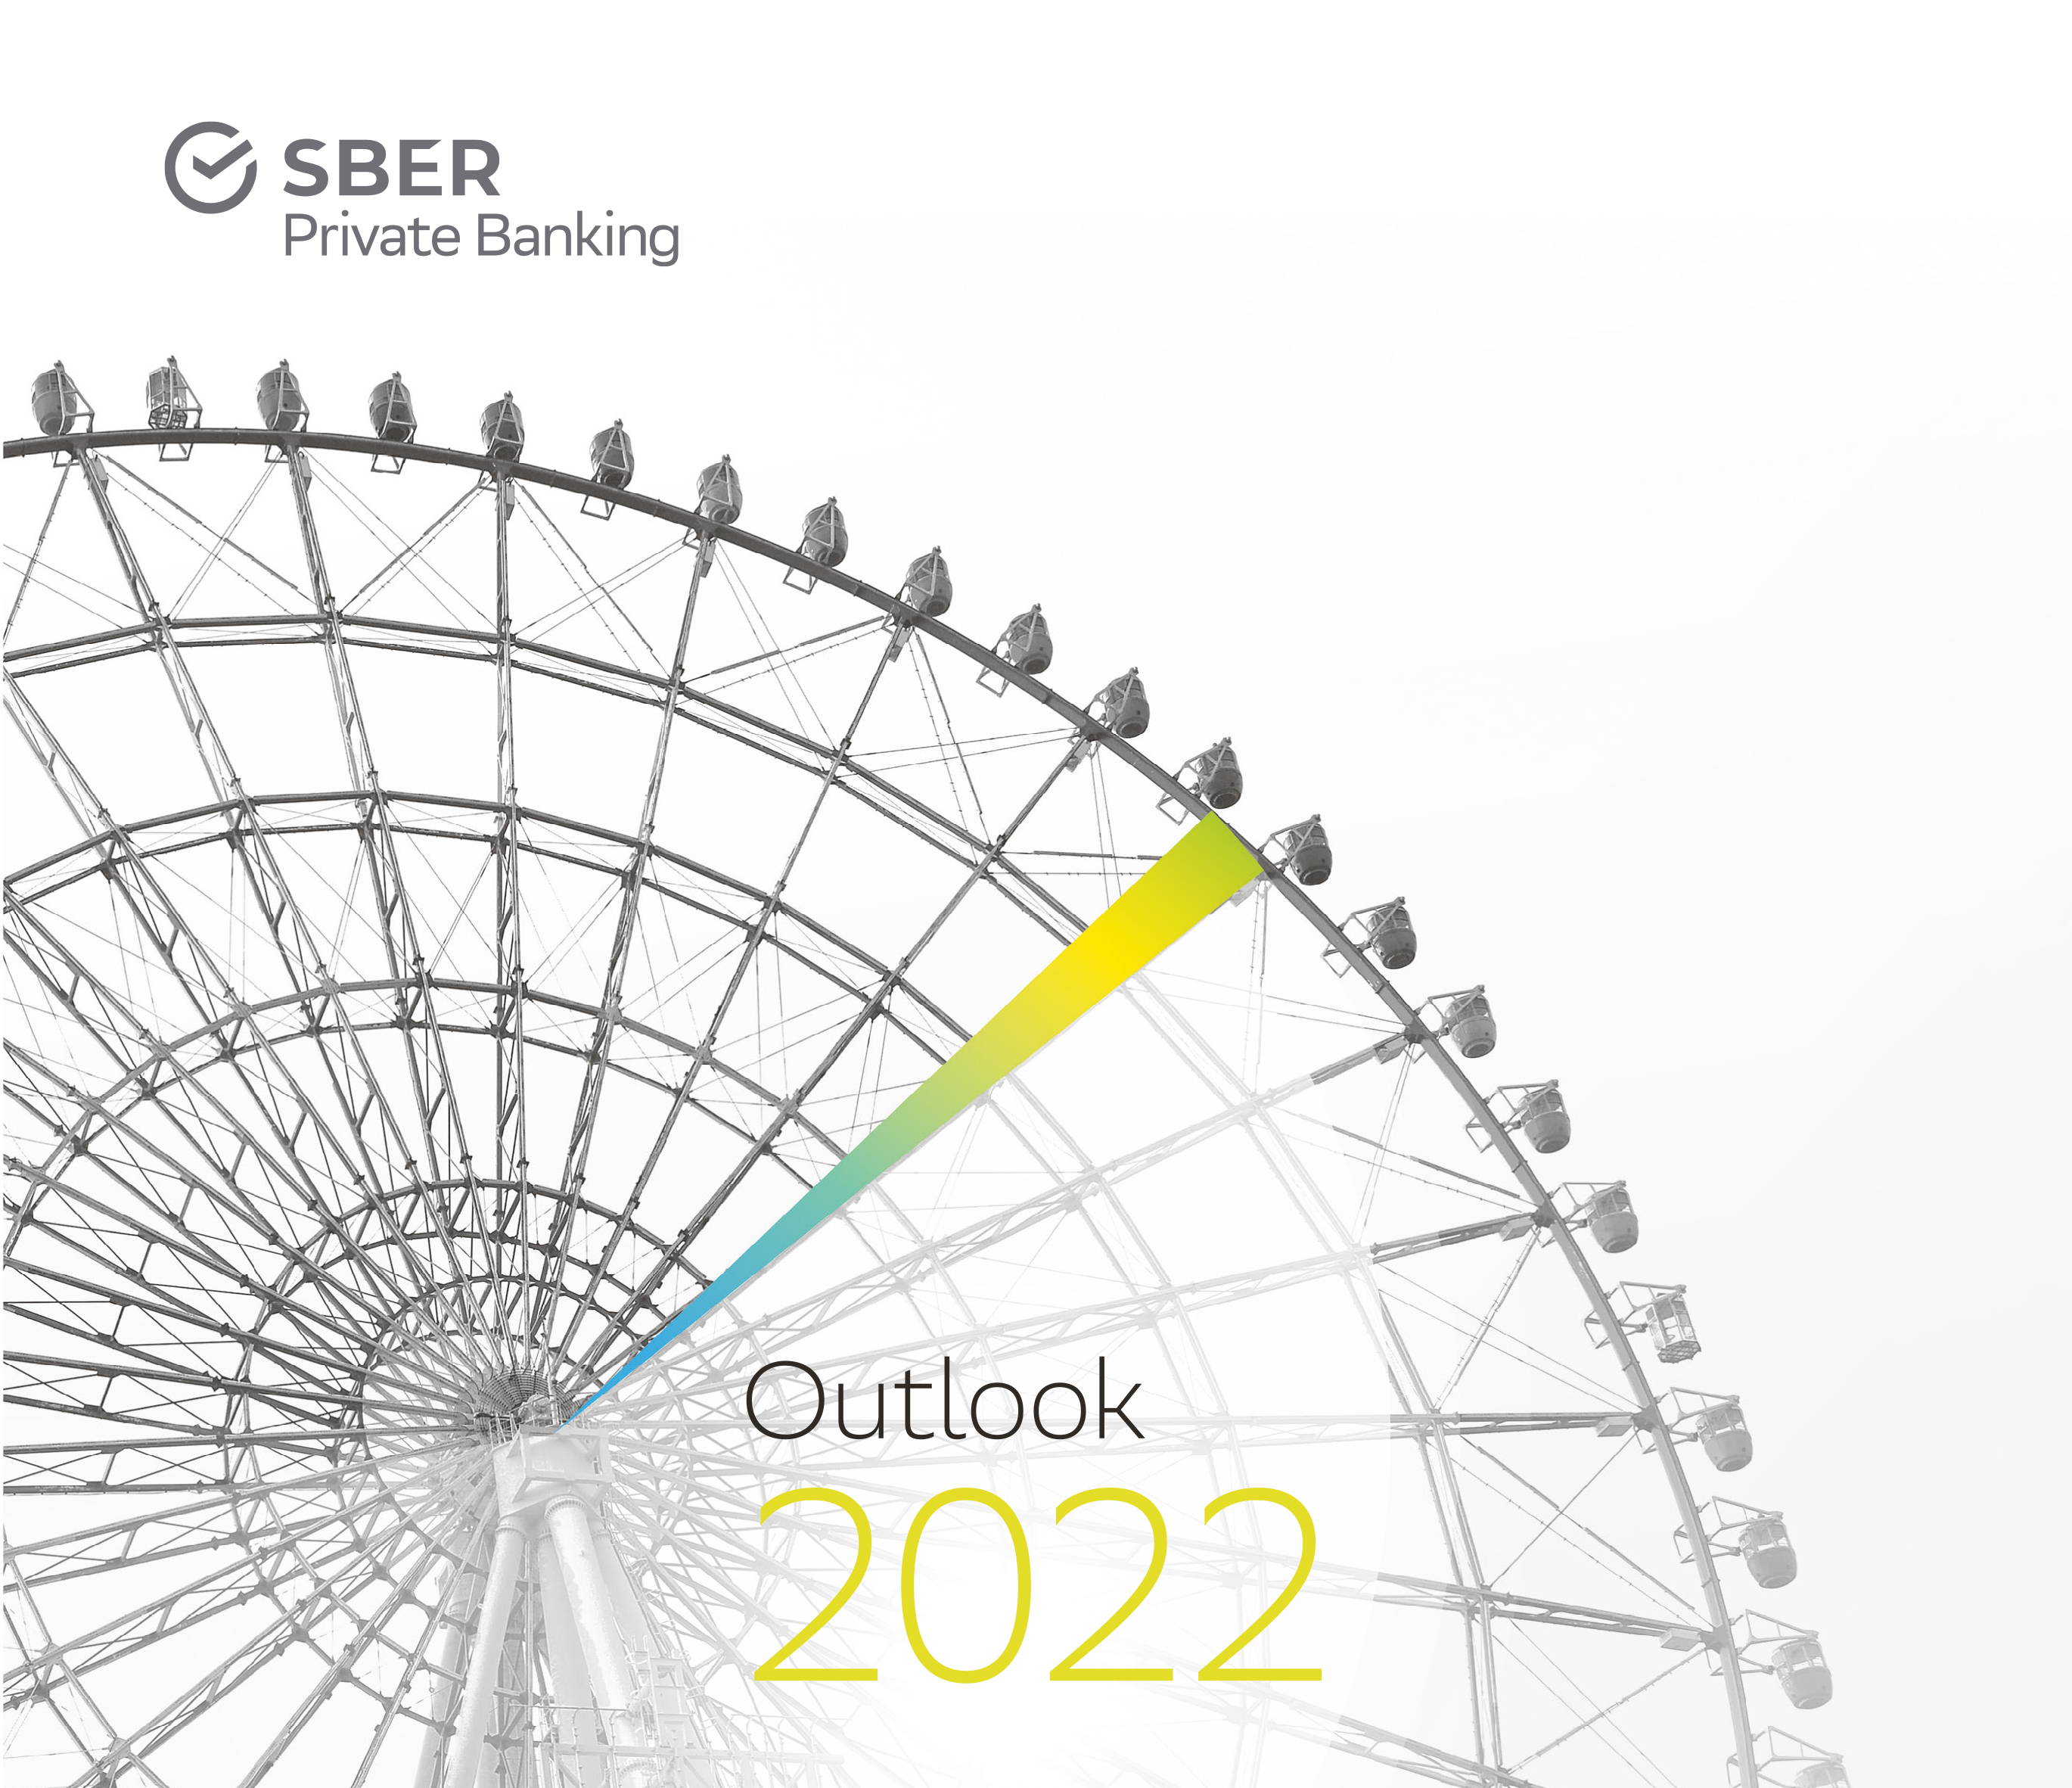 Sber Private Banking Outlook 2022